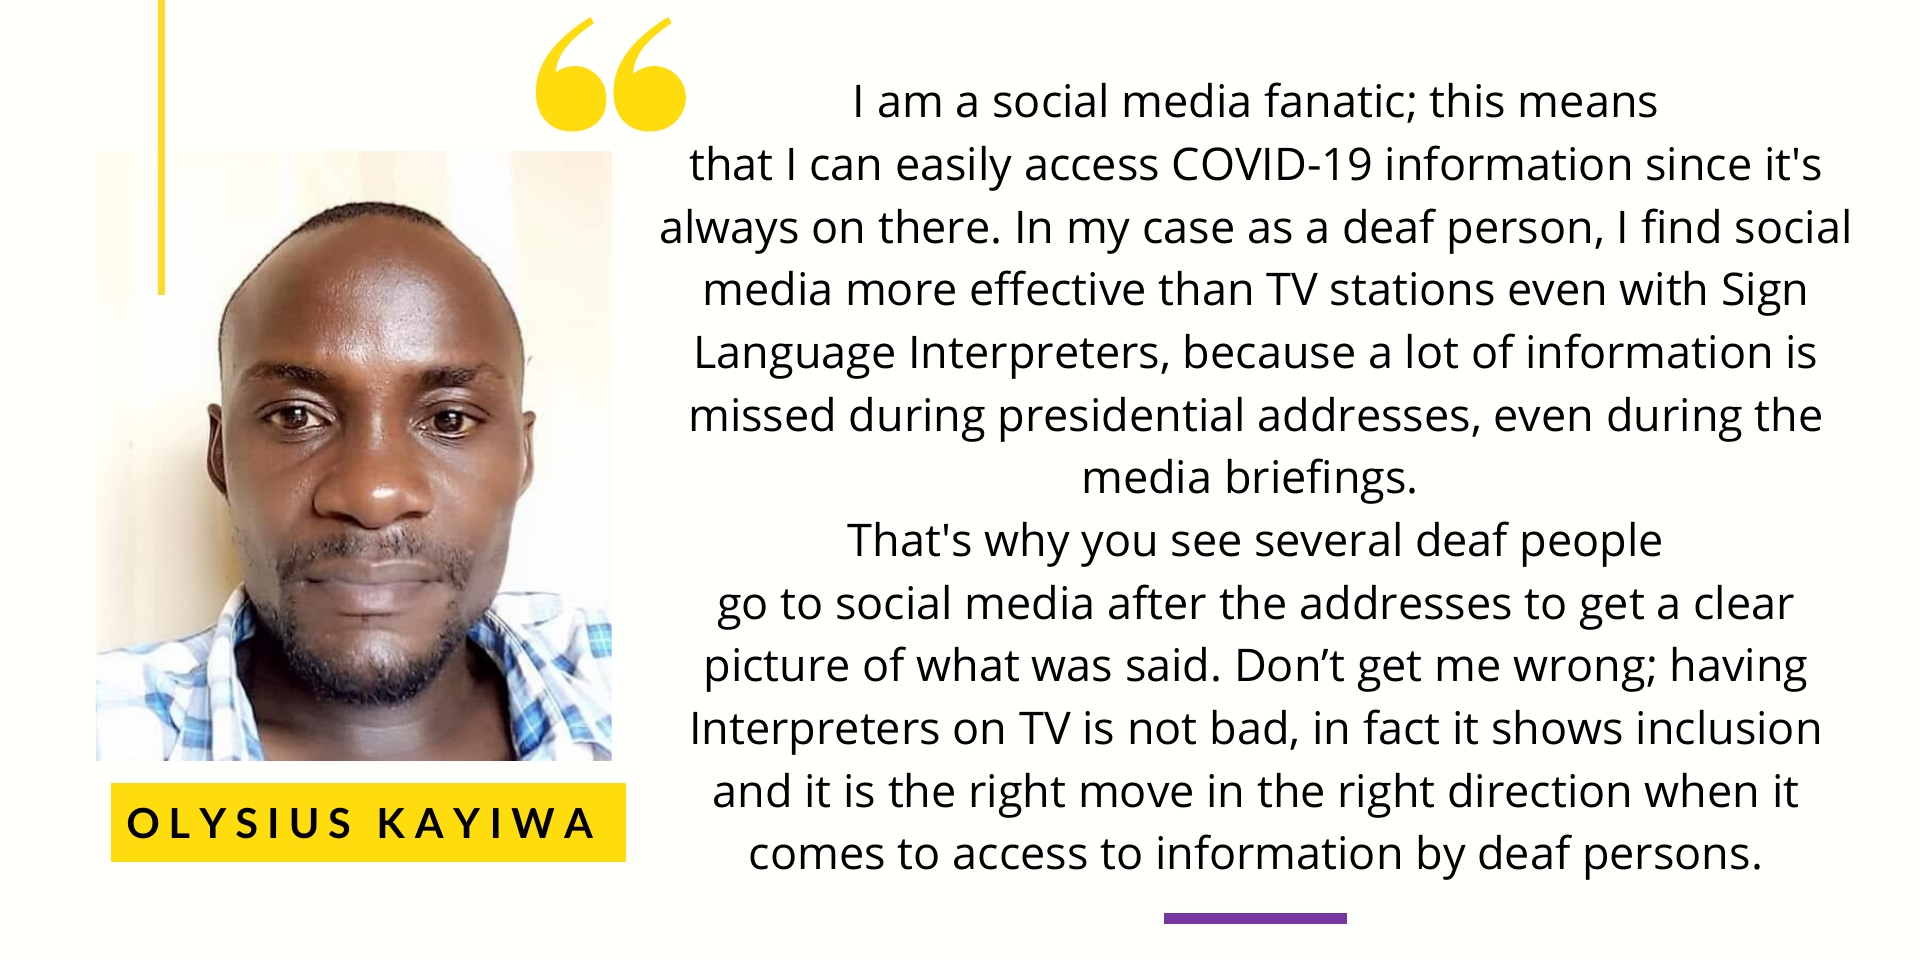 Olysius Kayiwa says I am a social media fanatic; this means that I can easily access COVID-19 information since it's always on there. In my case as a deaf person, I find social media more effective than TV stations even with Sign Language Interpreters, because a lot of information is missed during presidential addresses, even during the media briefings. That's why you see several deaf people go to social media after the addresses to get a clear picture of what was said. Don’t get me wrong; having Interpreters on TV is not bad, in fact it shows inclusion and it is the right move in the right direction when it comes to access to information by deaf persons. 